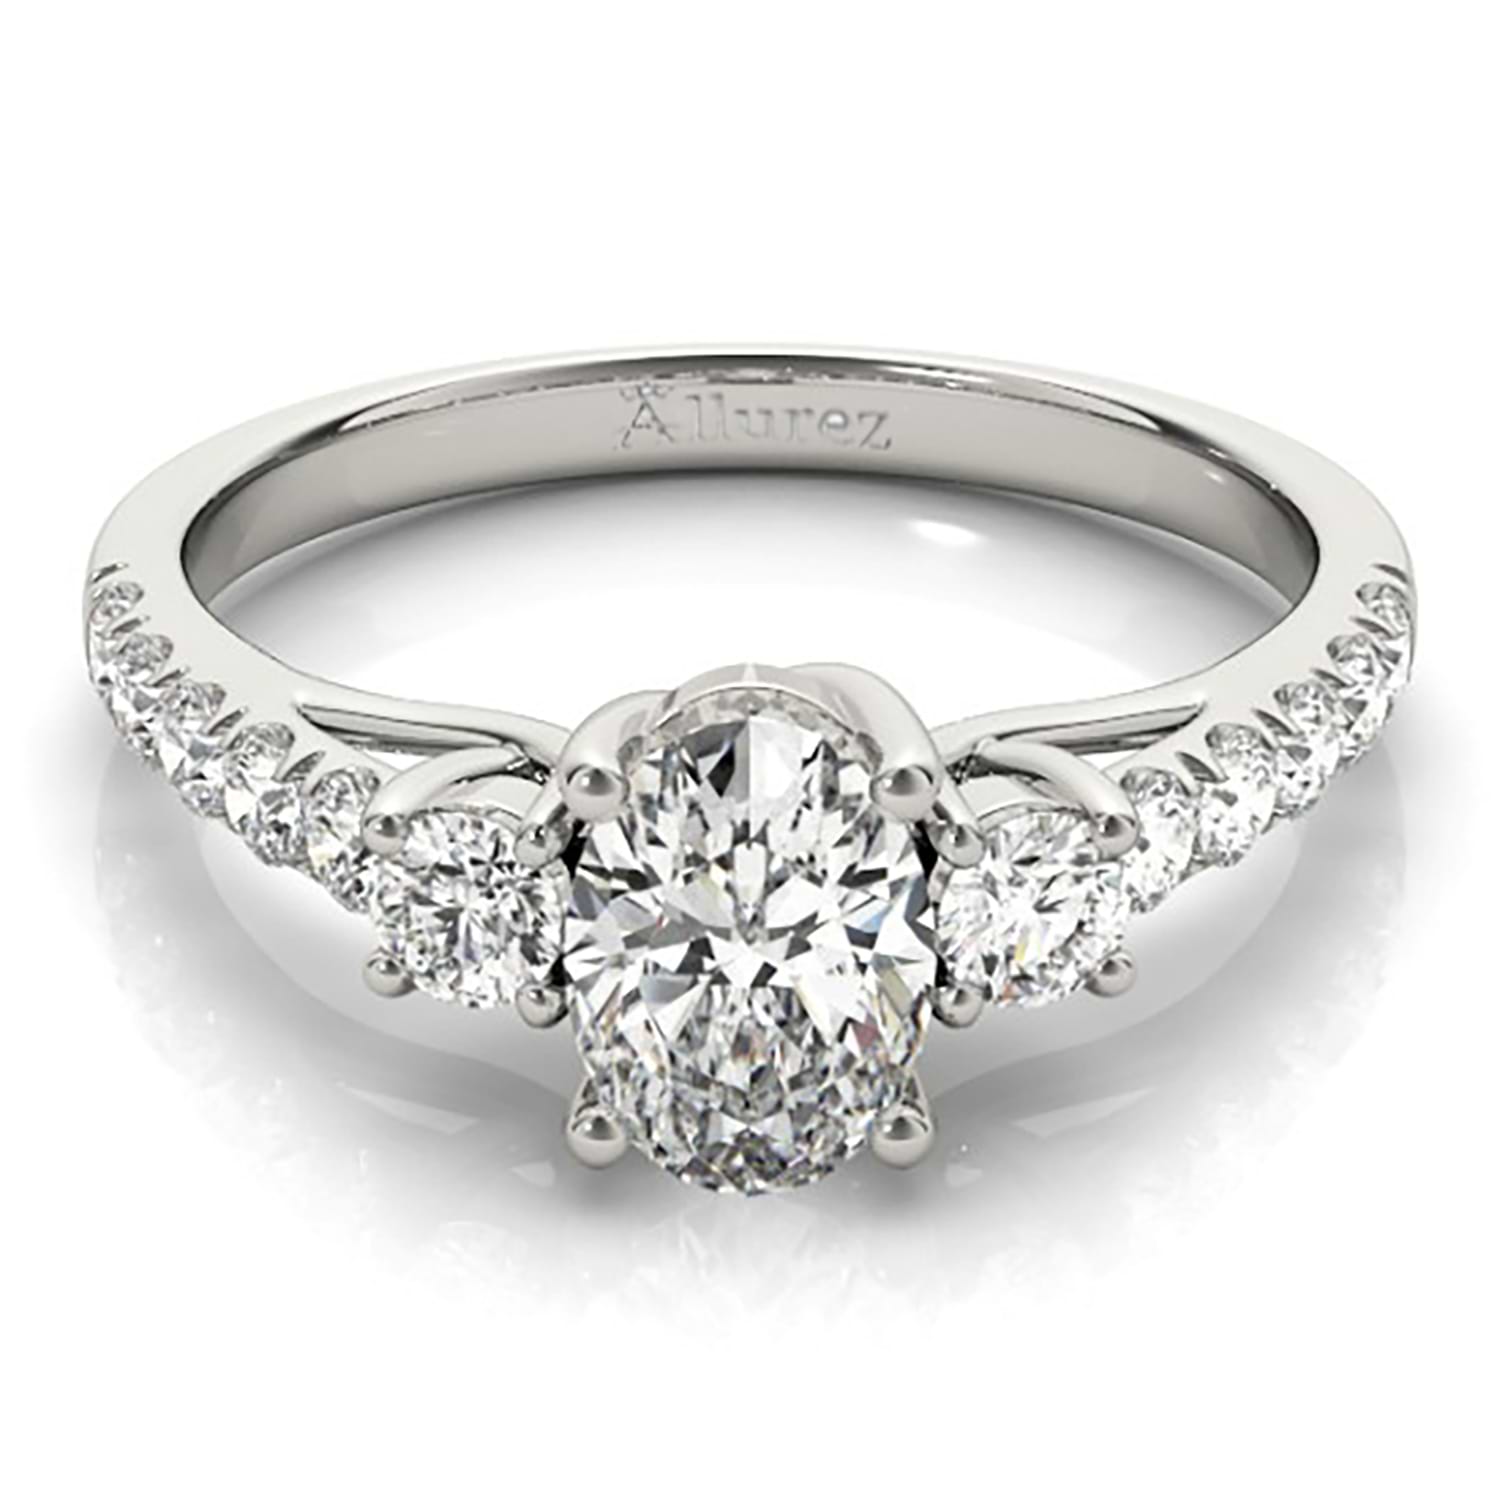 Oval Cut Diamond Engagement Ring 18k White Gold (1.40ct)